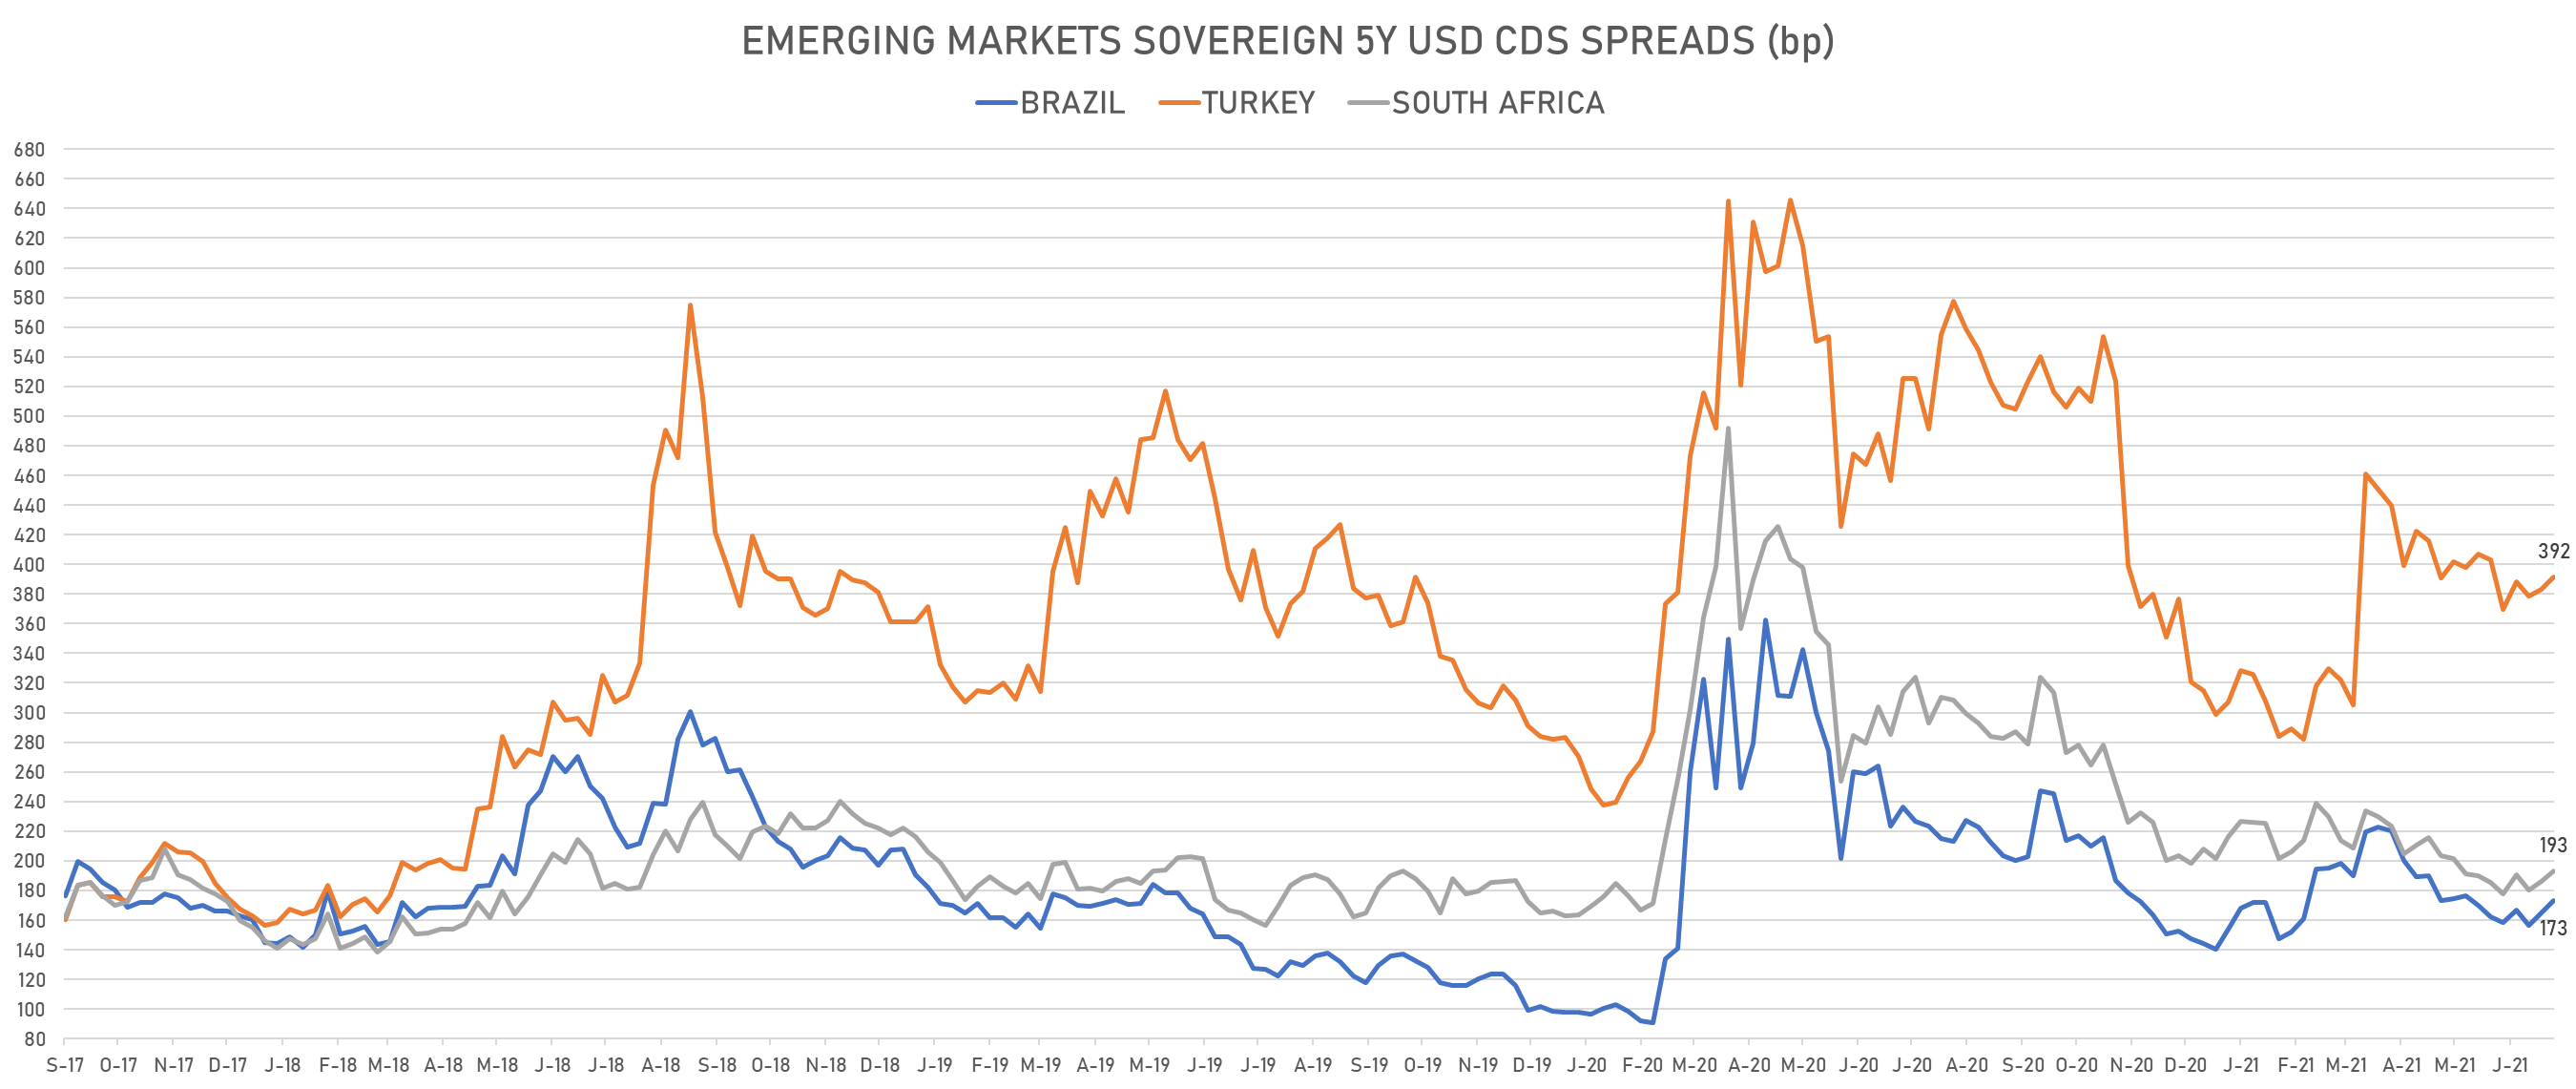 Emerging Markets CDS Spreads | Sources: phipost, Refinitiv